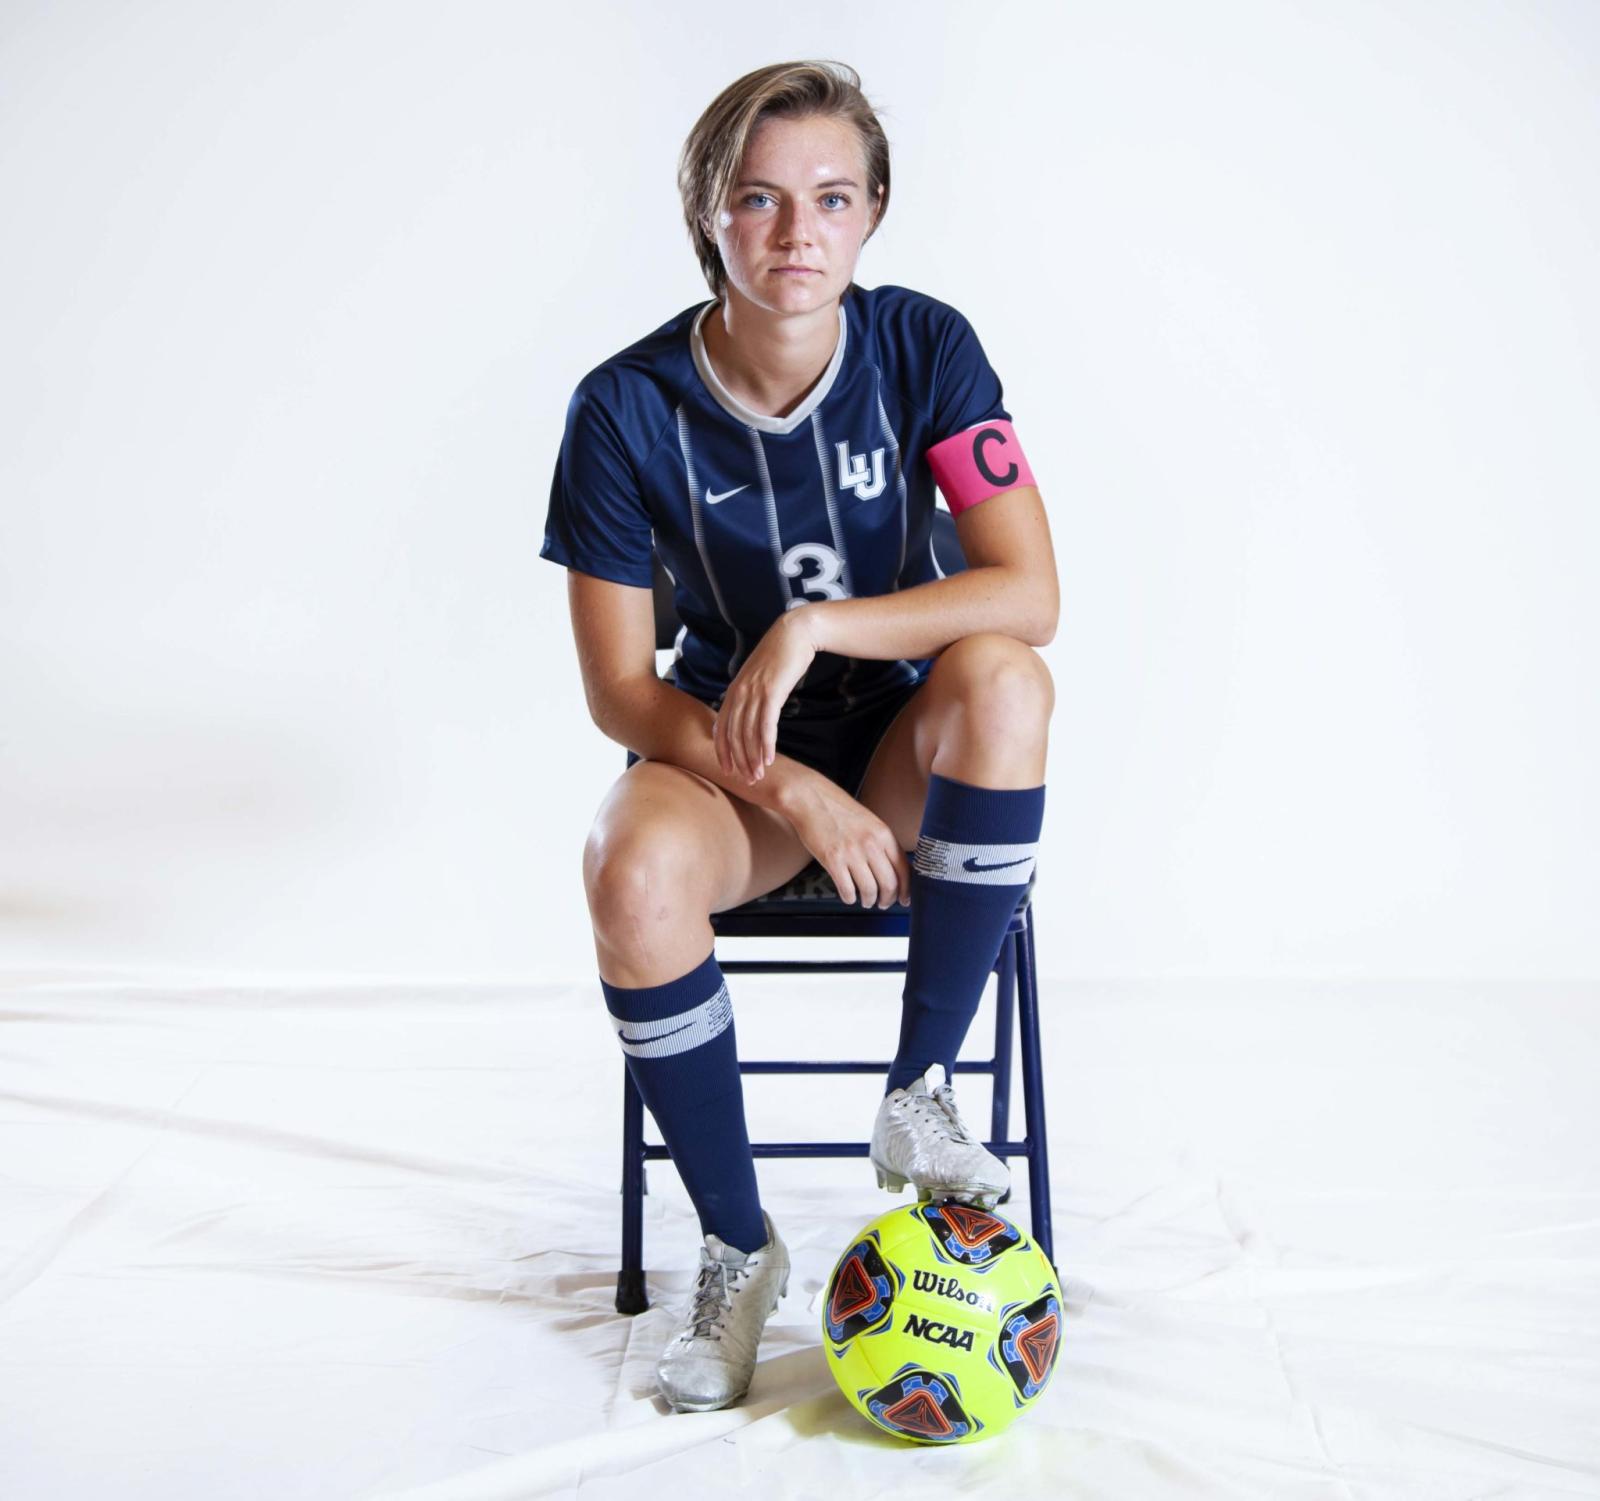 Soccer player Ellie Younger poses on a chair while holding a soccer ball under one foot.